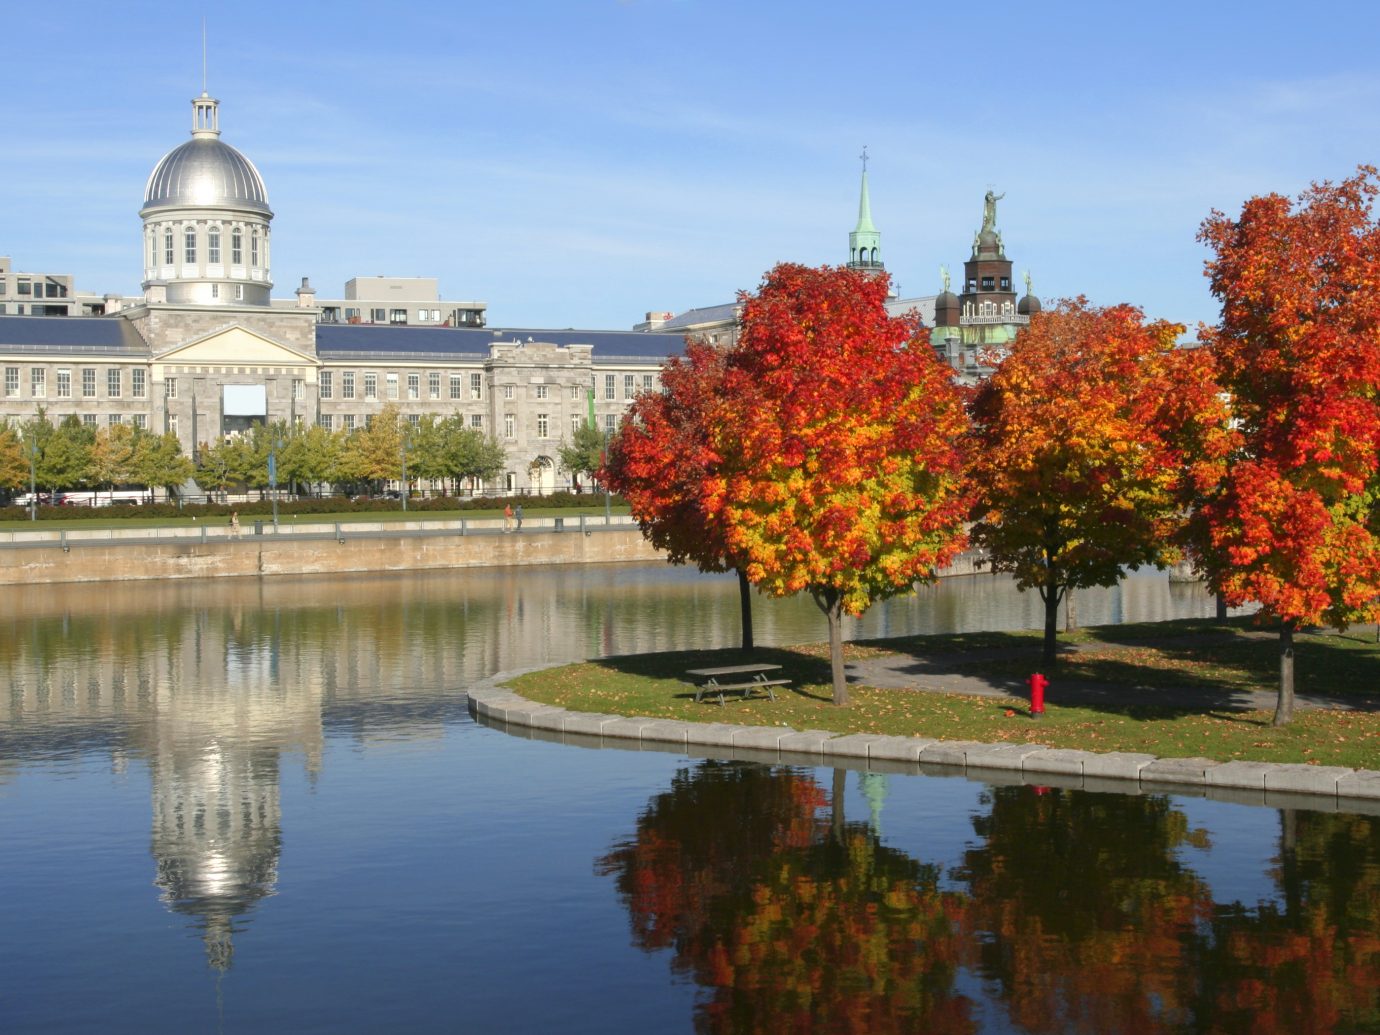 Old Montreal, Bonsecours Market relections in autumn, Quebec, Canada